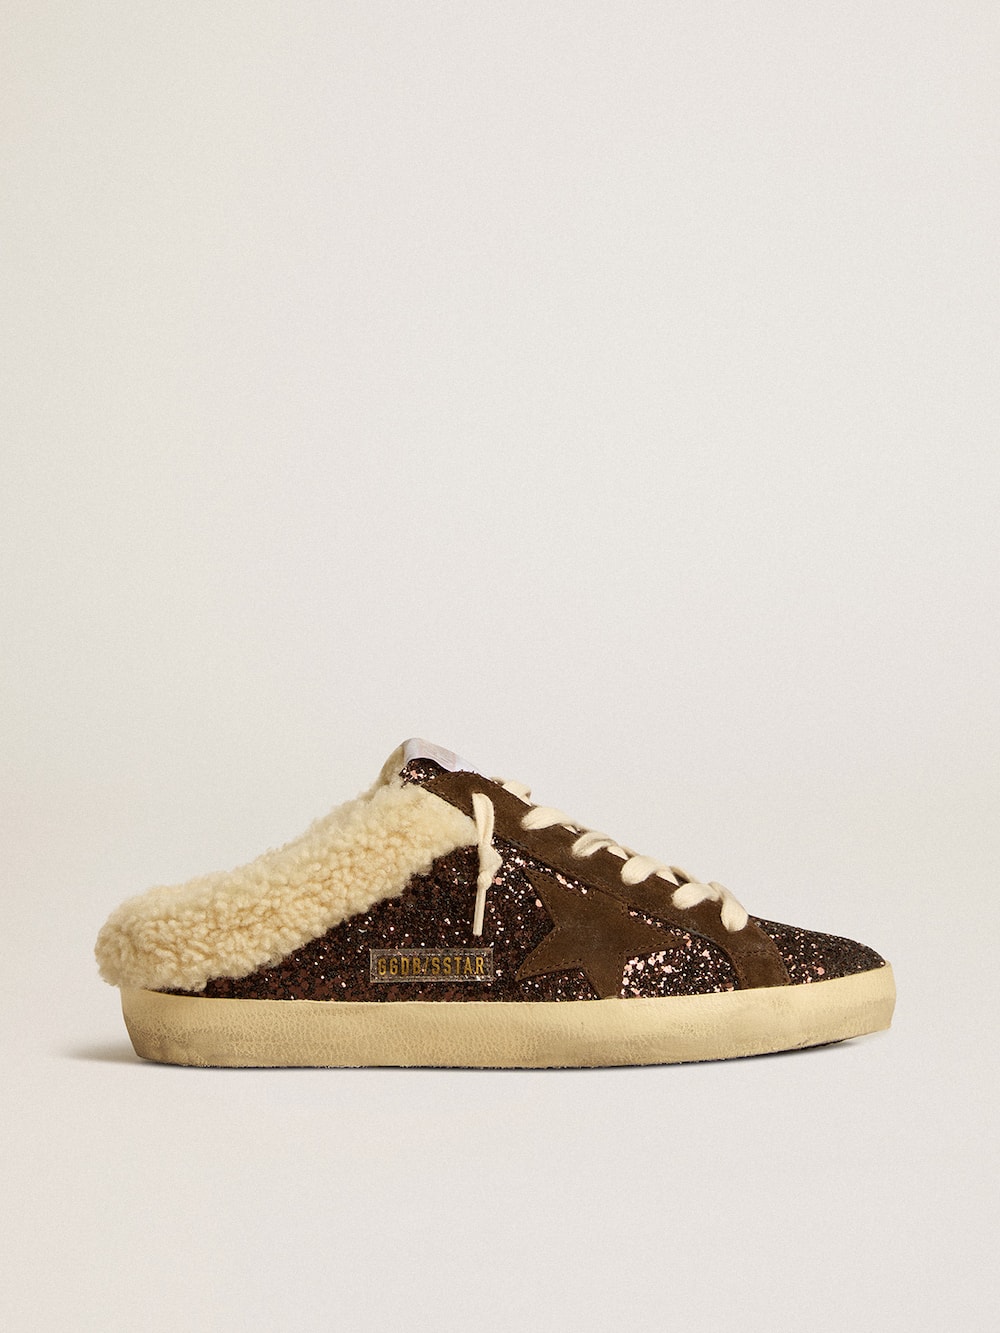 Golden Goose - Super-Star Sabots in glitter with brown star and shearling lining in 